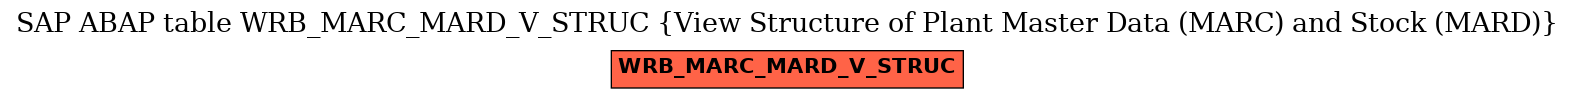 E-R Diagram for table WRB_MARC_MARD_V_STRUC (View Structure of Plant Master Data (MARC) and Stock (MARD))